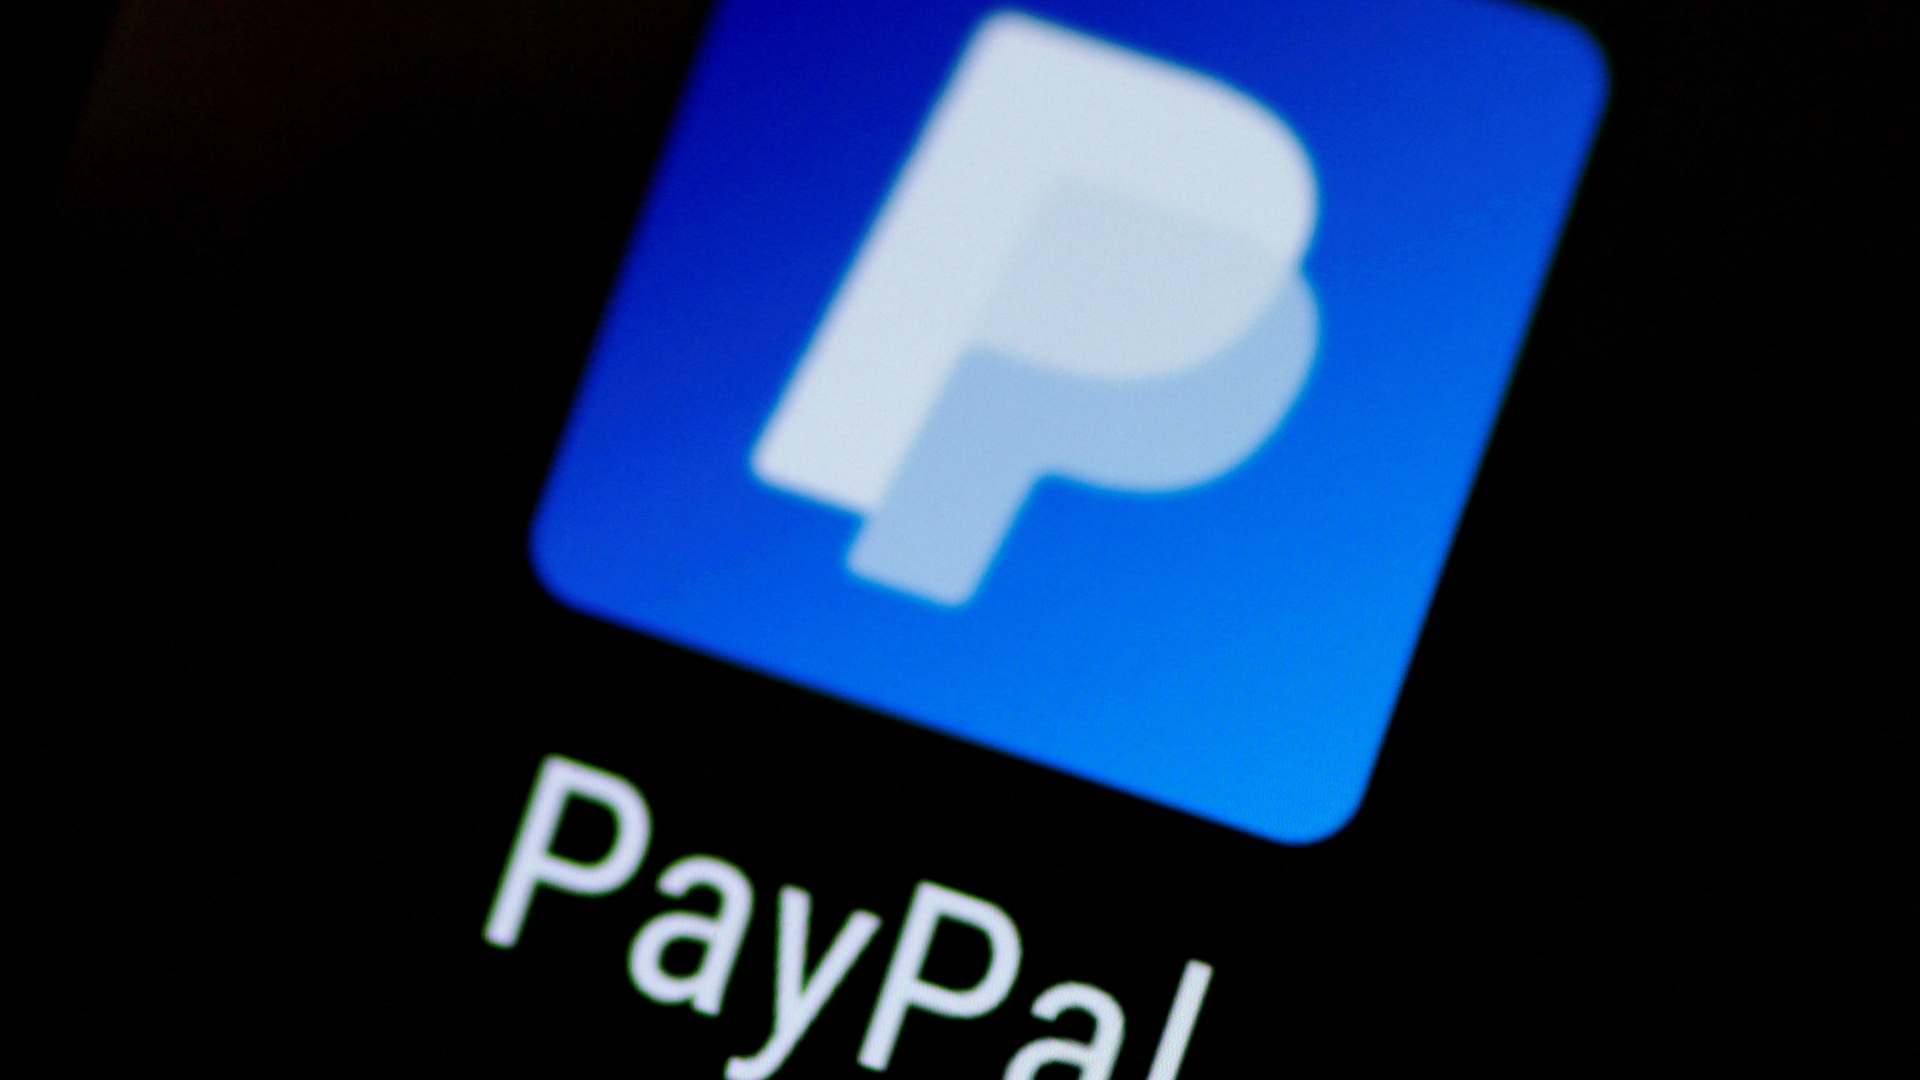 PayPal is giving away FREE money – and all you have to do is download an app from Google